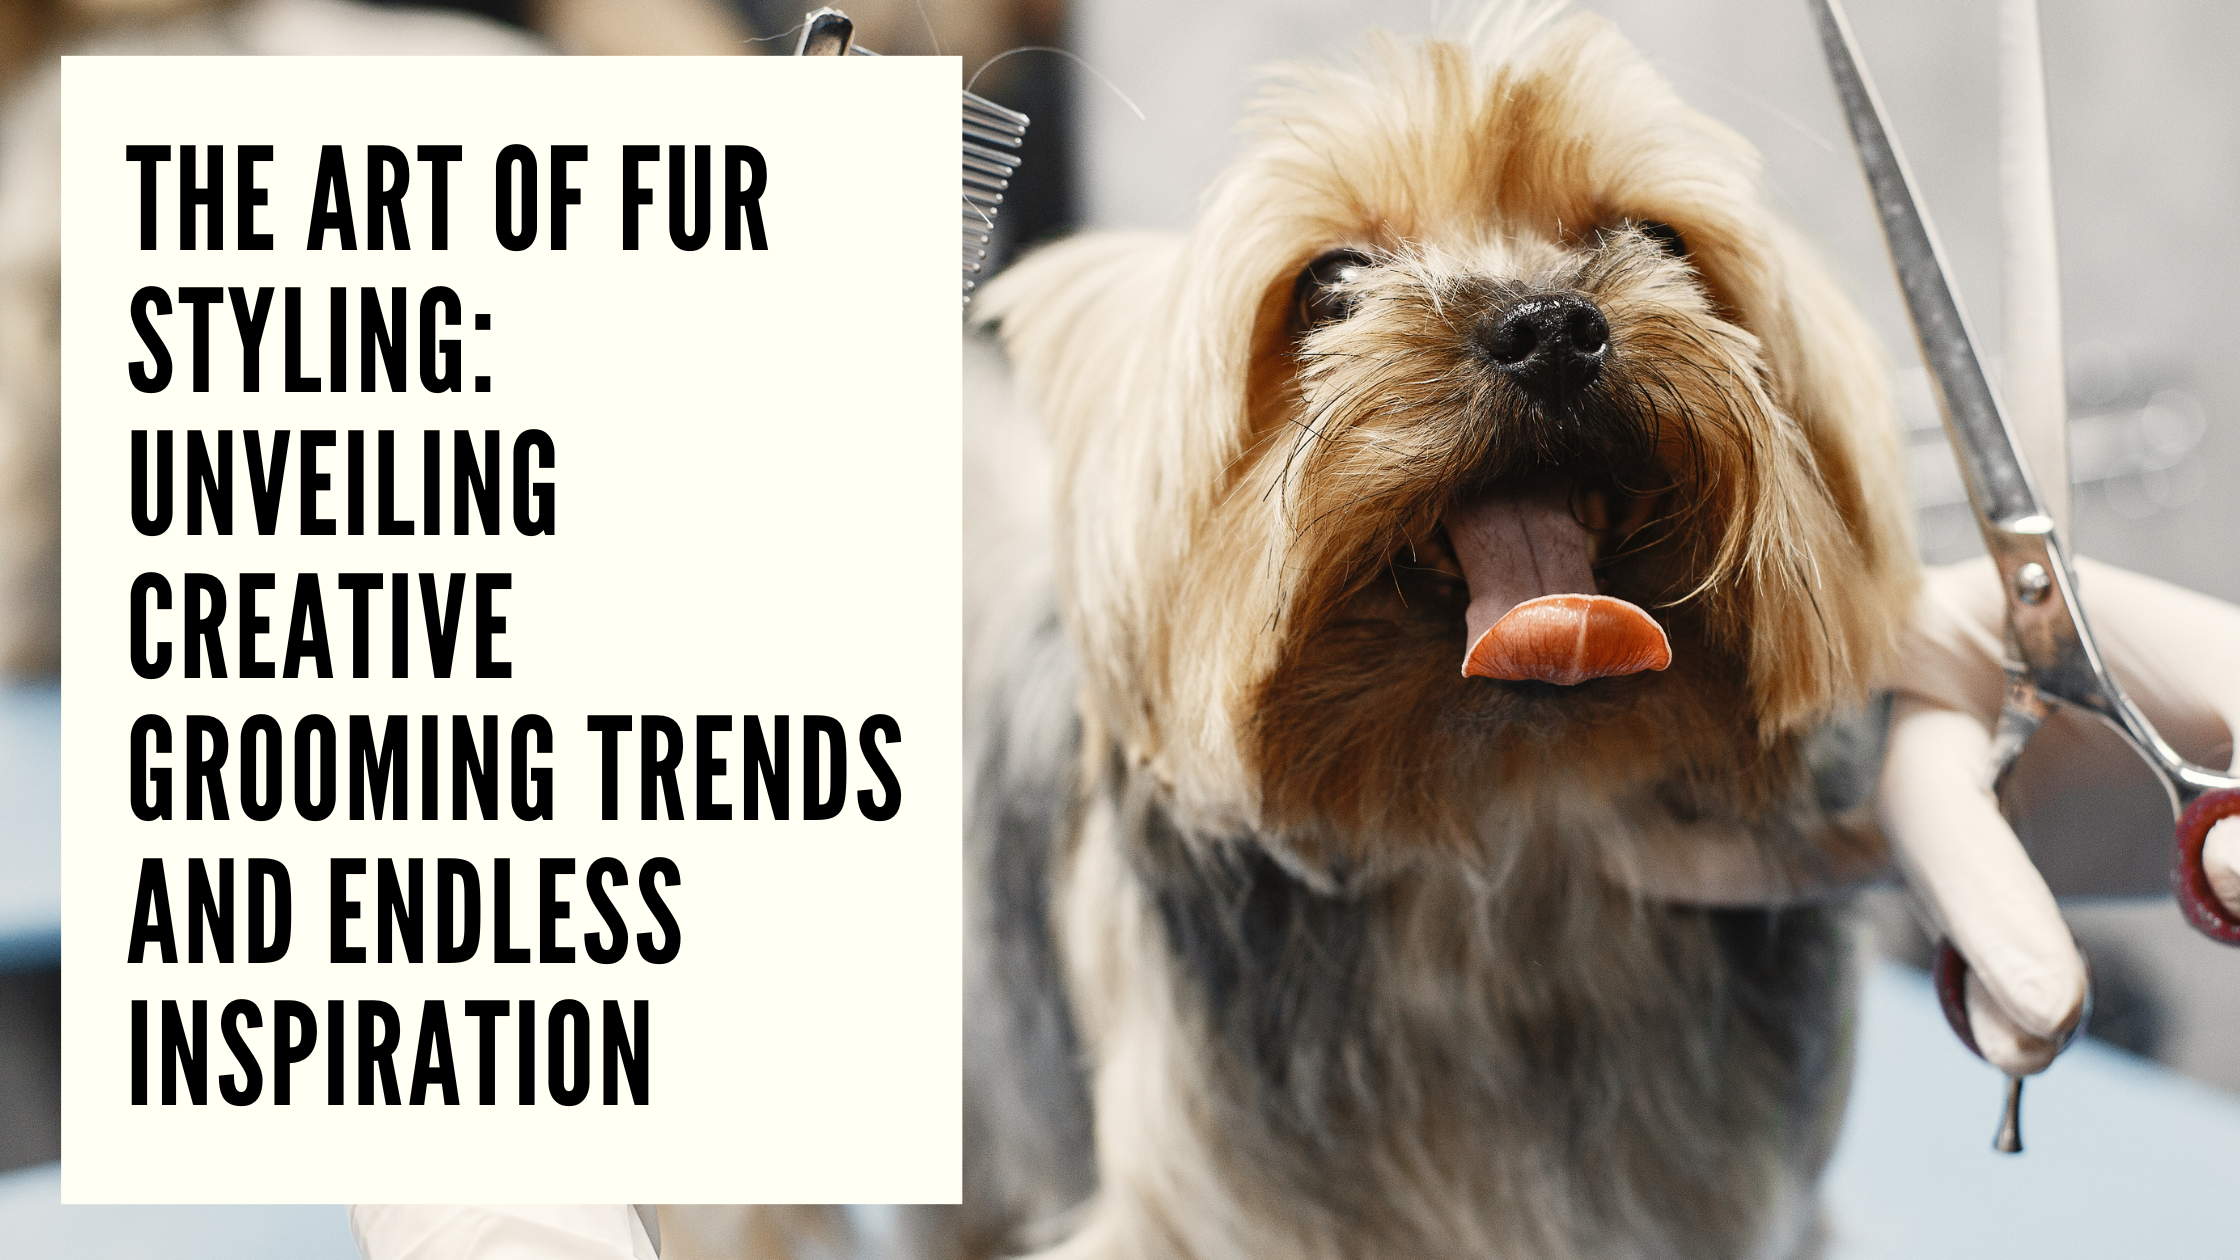 The Art of Fur Styling Unveiling Creative Grooming Trends and Endless Inspiration